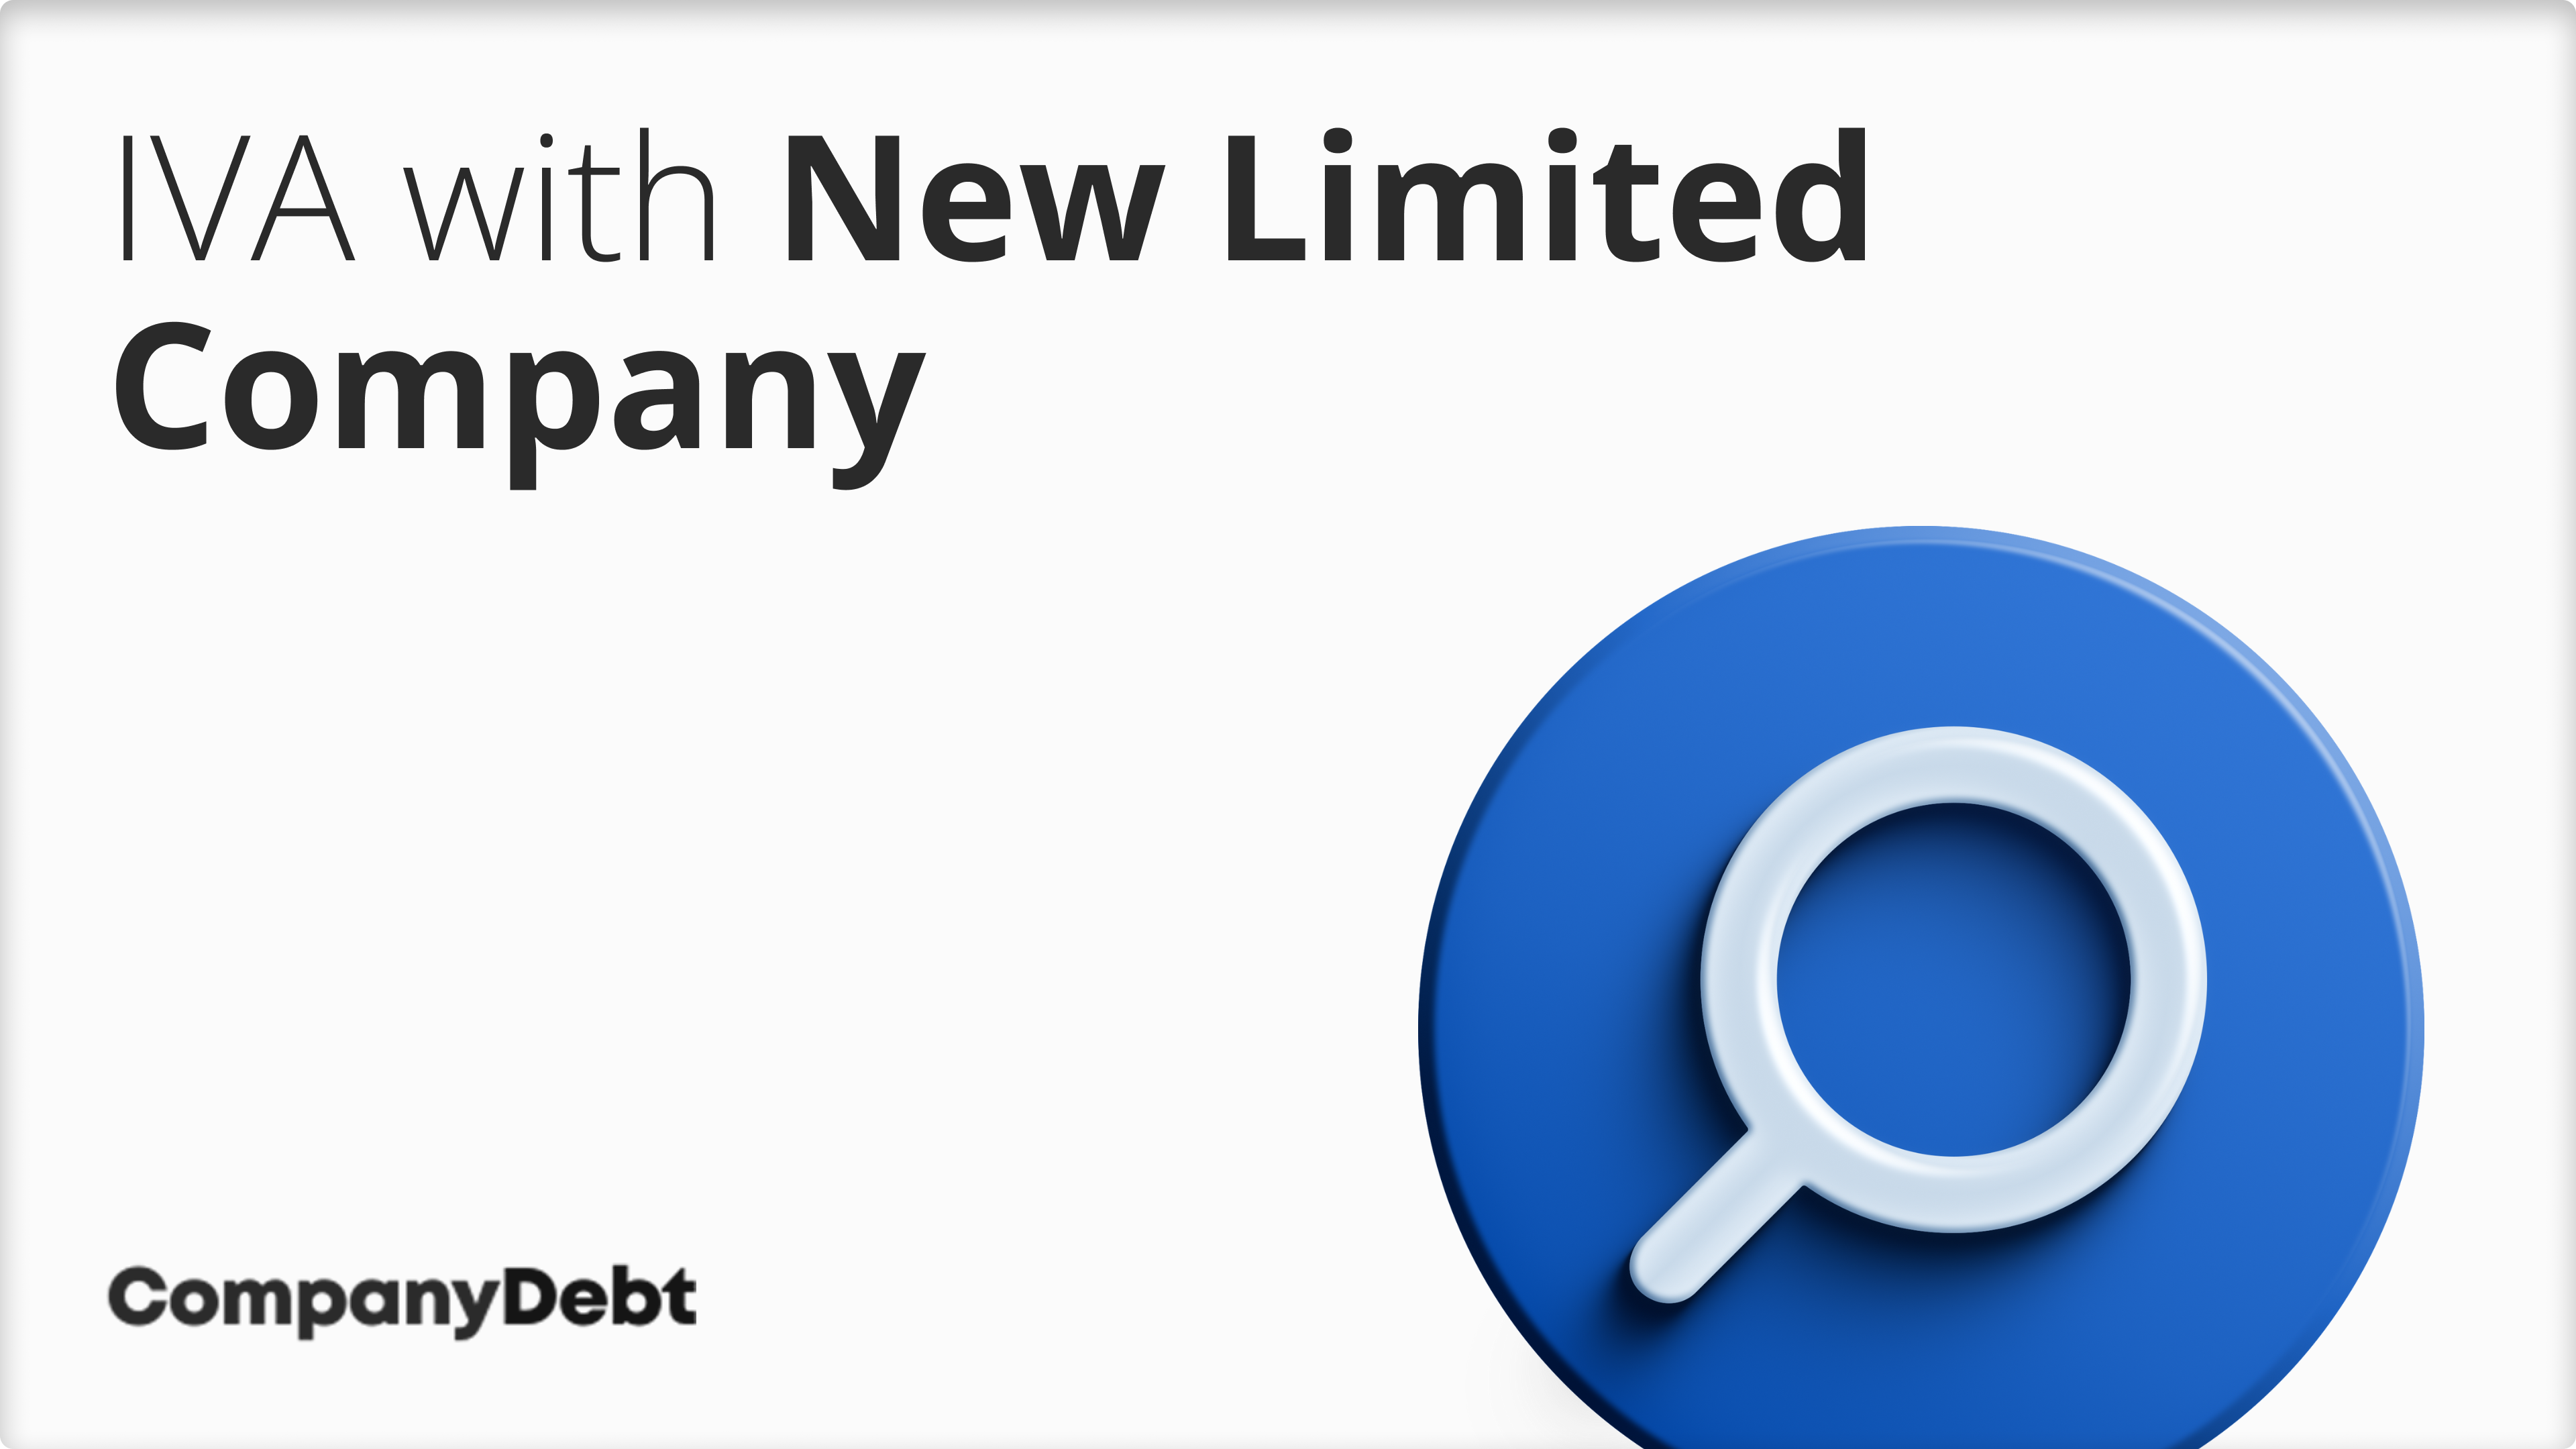 IVA-with-New-Limited-Company